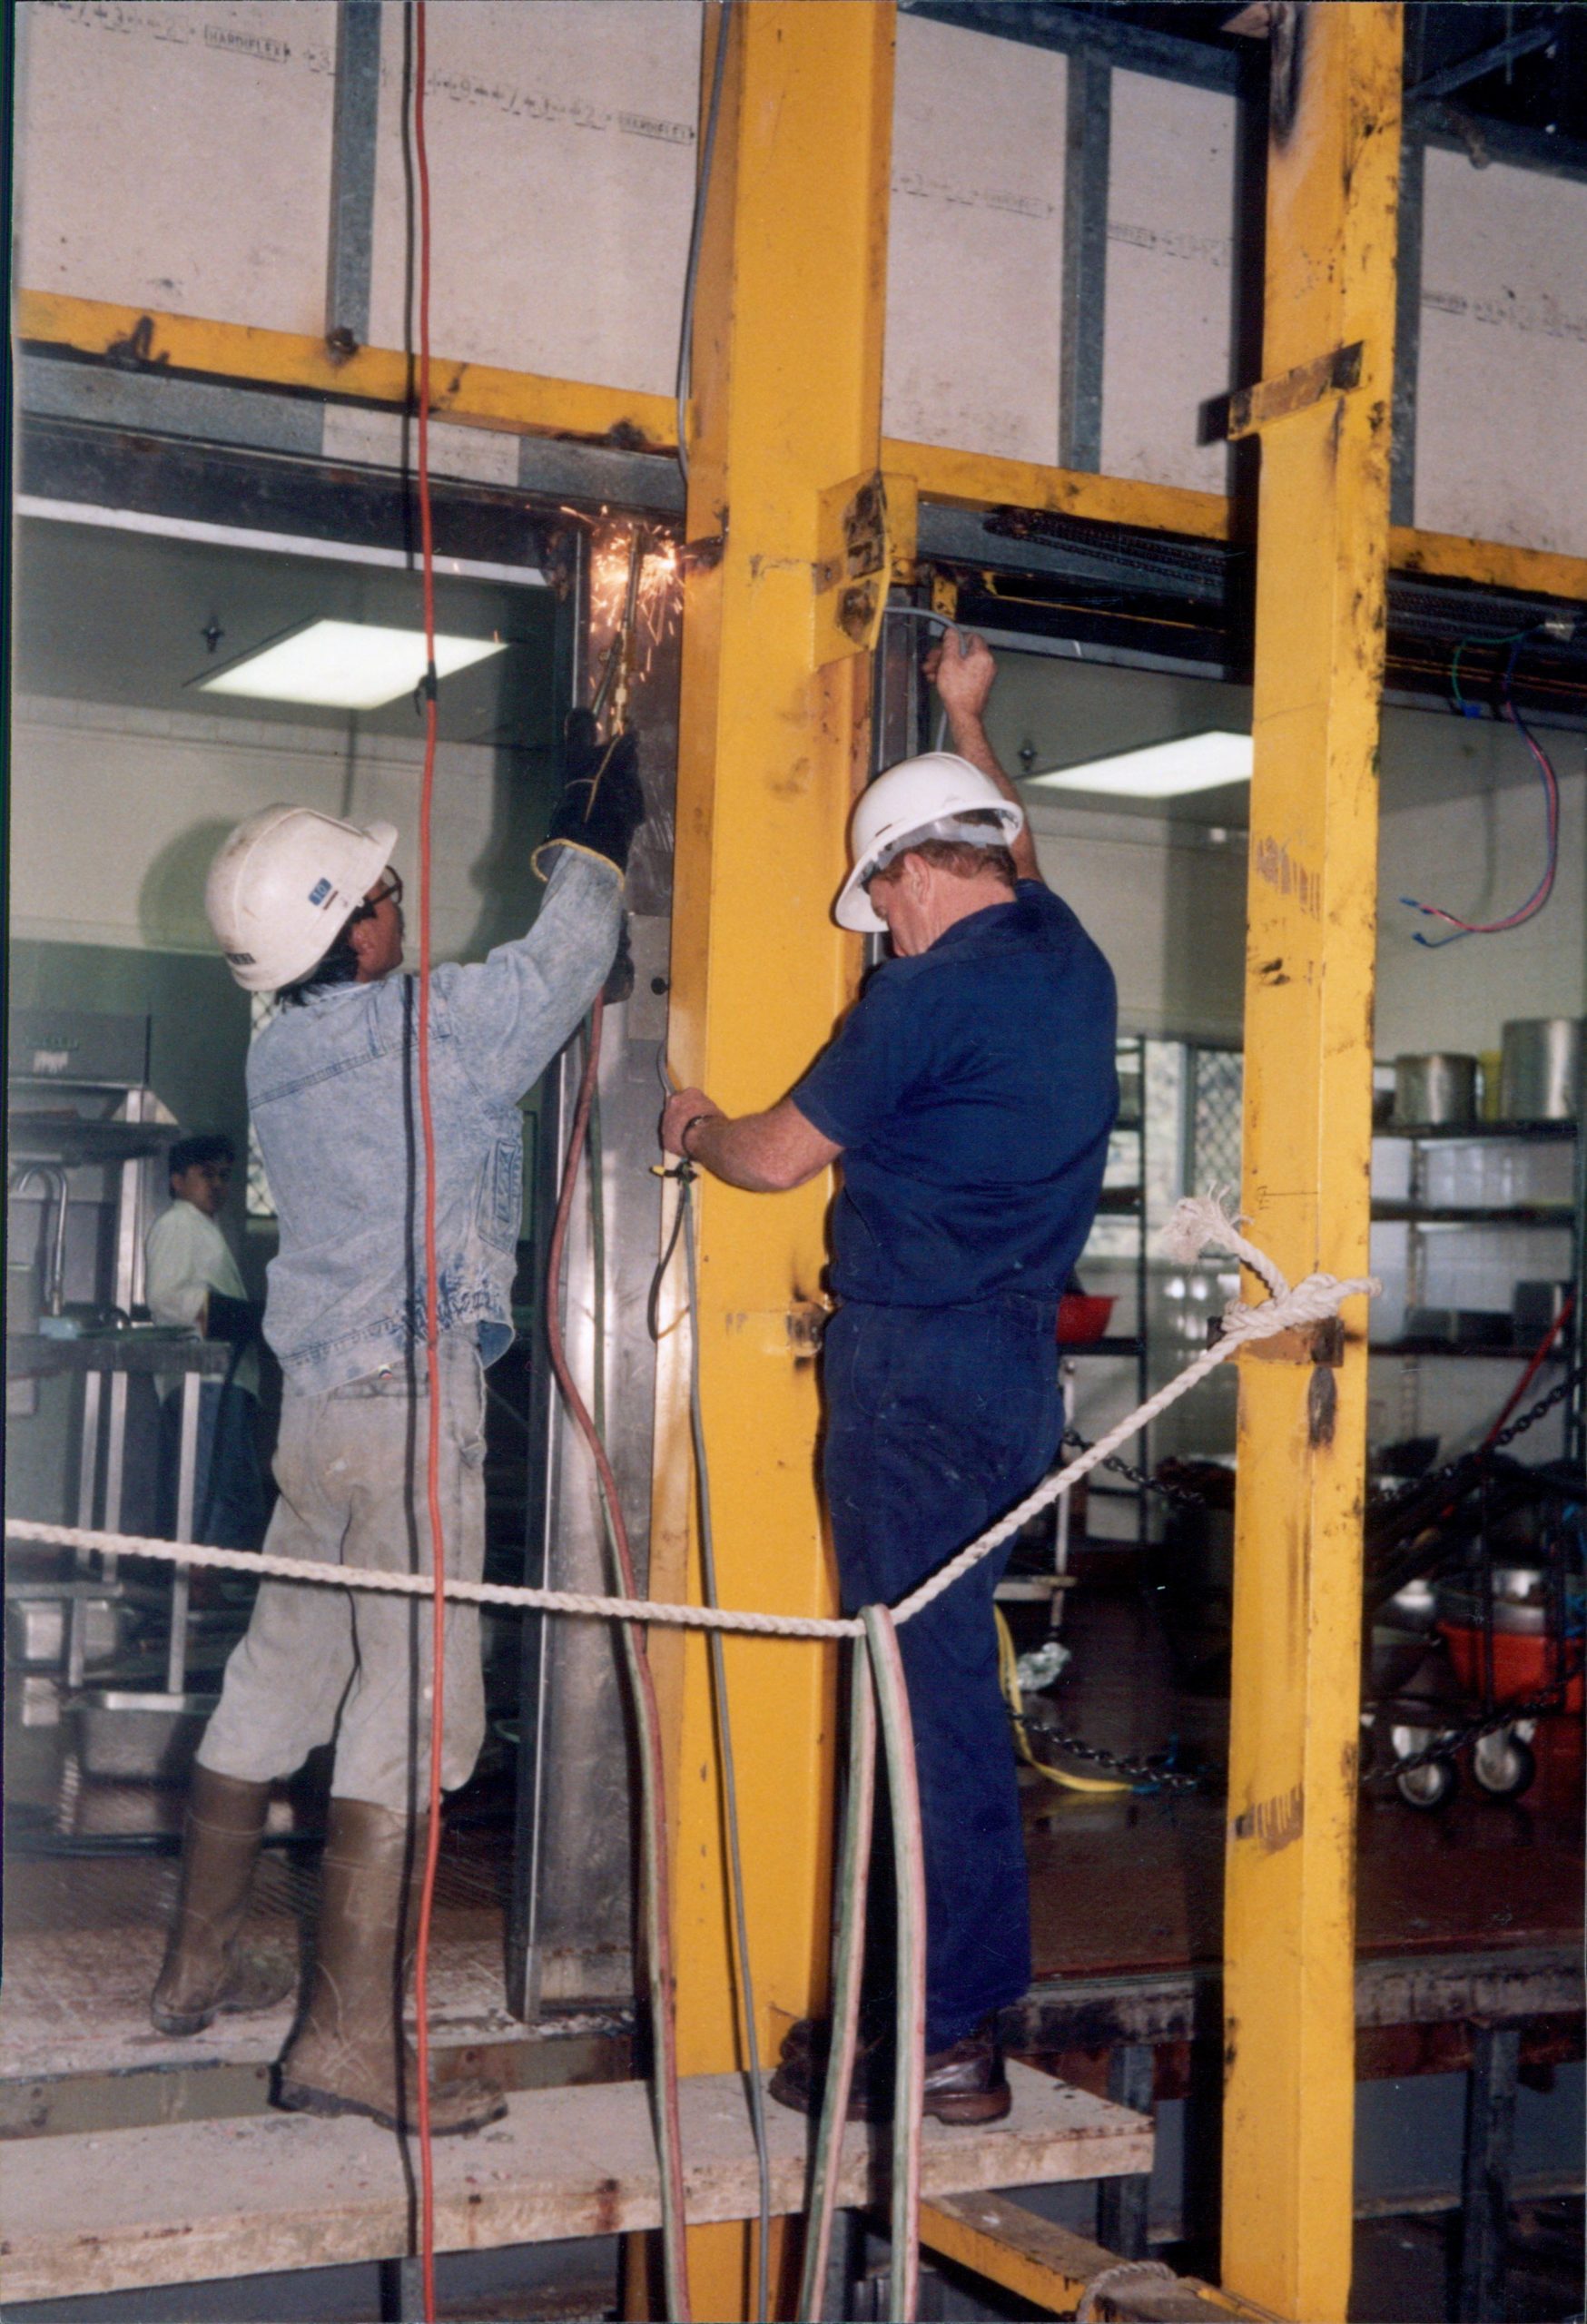 Two workers welding a metal structure